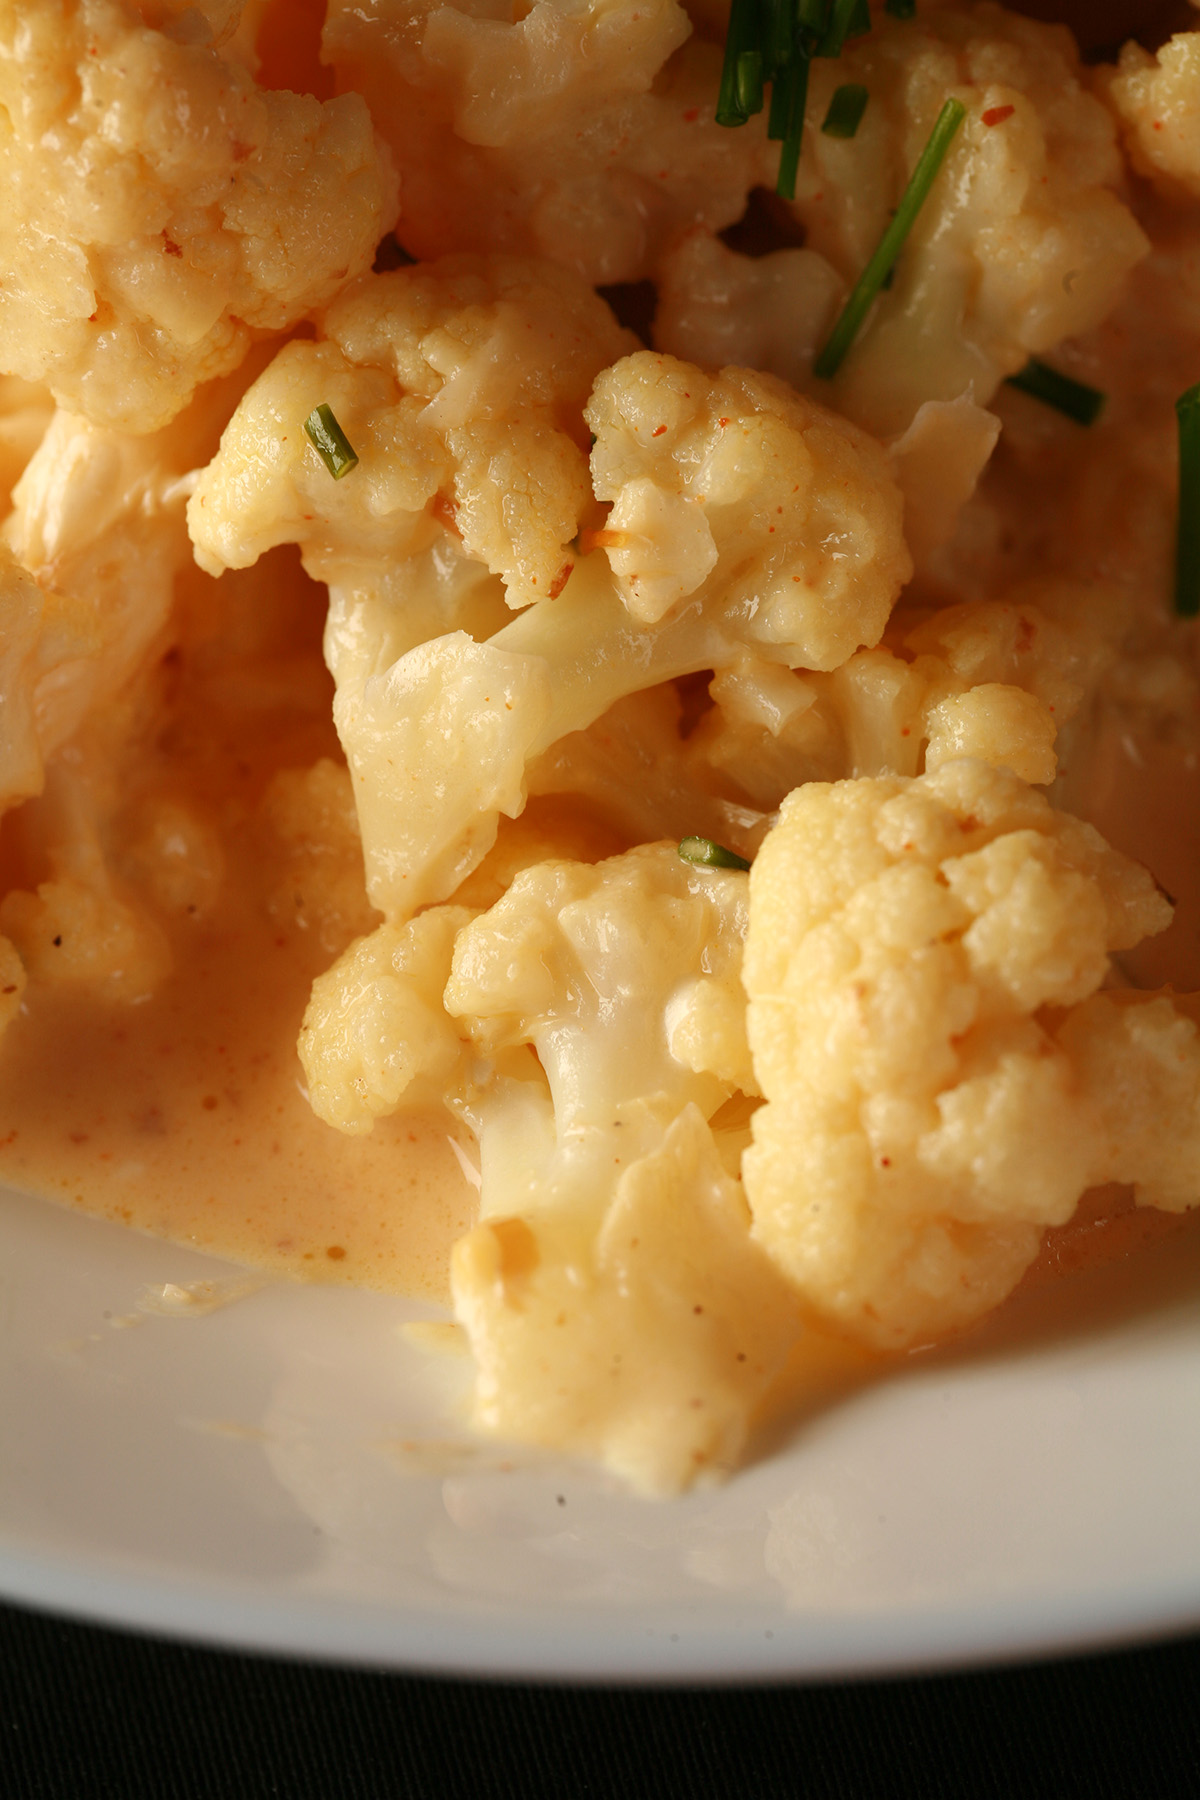 Close up view of a bowl of small pieces of cauliflower, coated in a creamy cheese sauce.